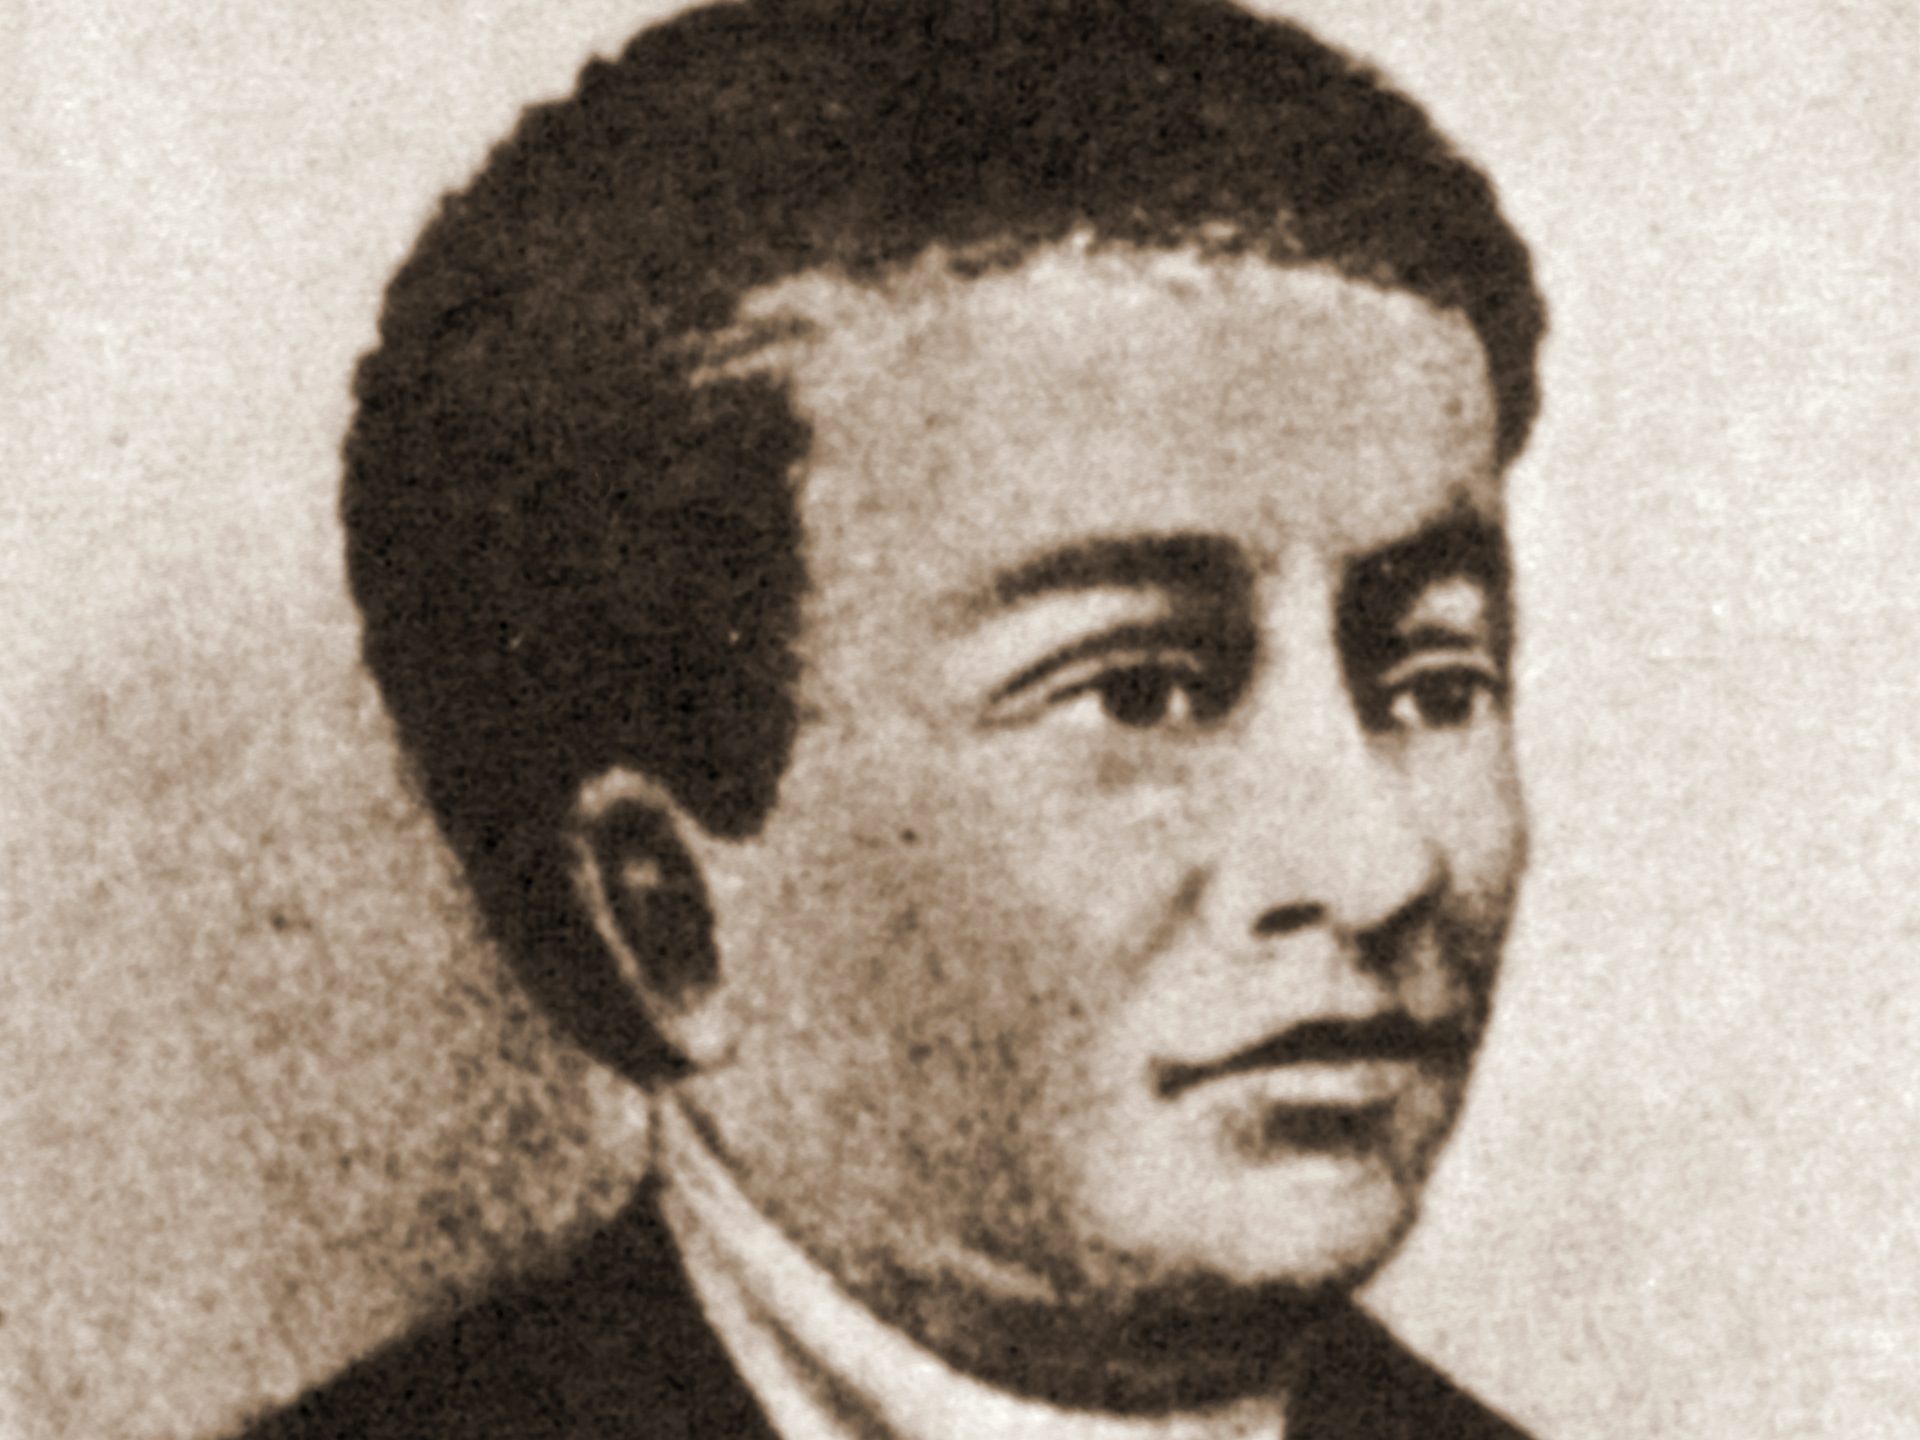 An illustrated portrait of American author, astronomer and farmer Benjamin Banneker from the mid- to late-18th century. He's credited as being a surveyor, farmer, mathematician and astronomer.